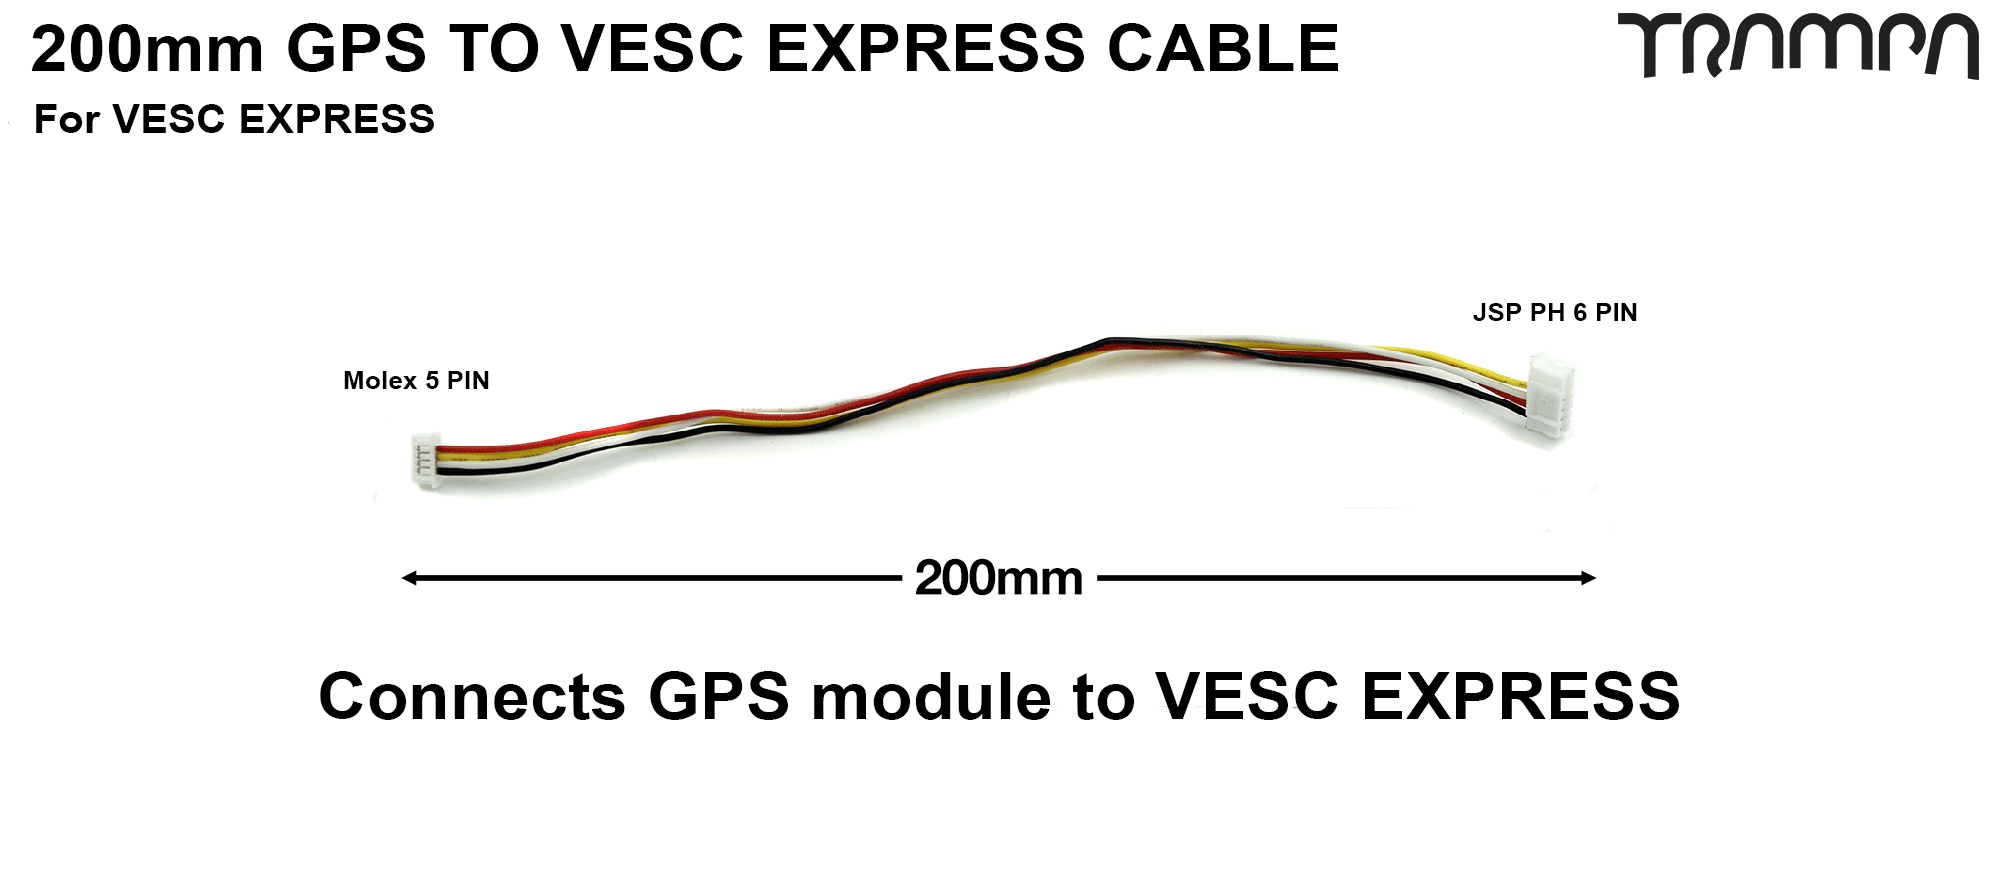 UART GPS to VESC EXPRESS Silicon Cable Black/Yellow/White/Red - 100mm